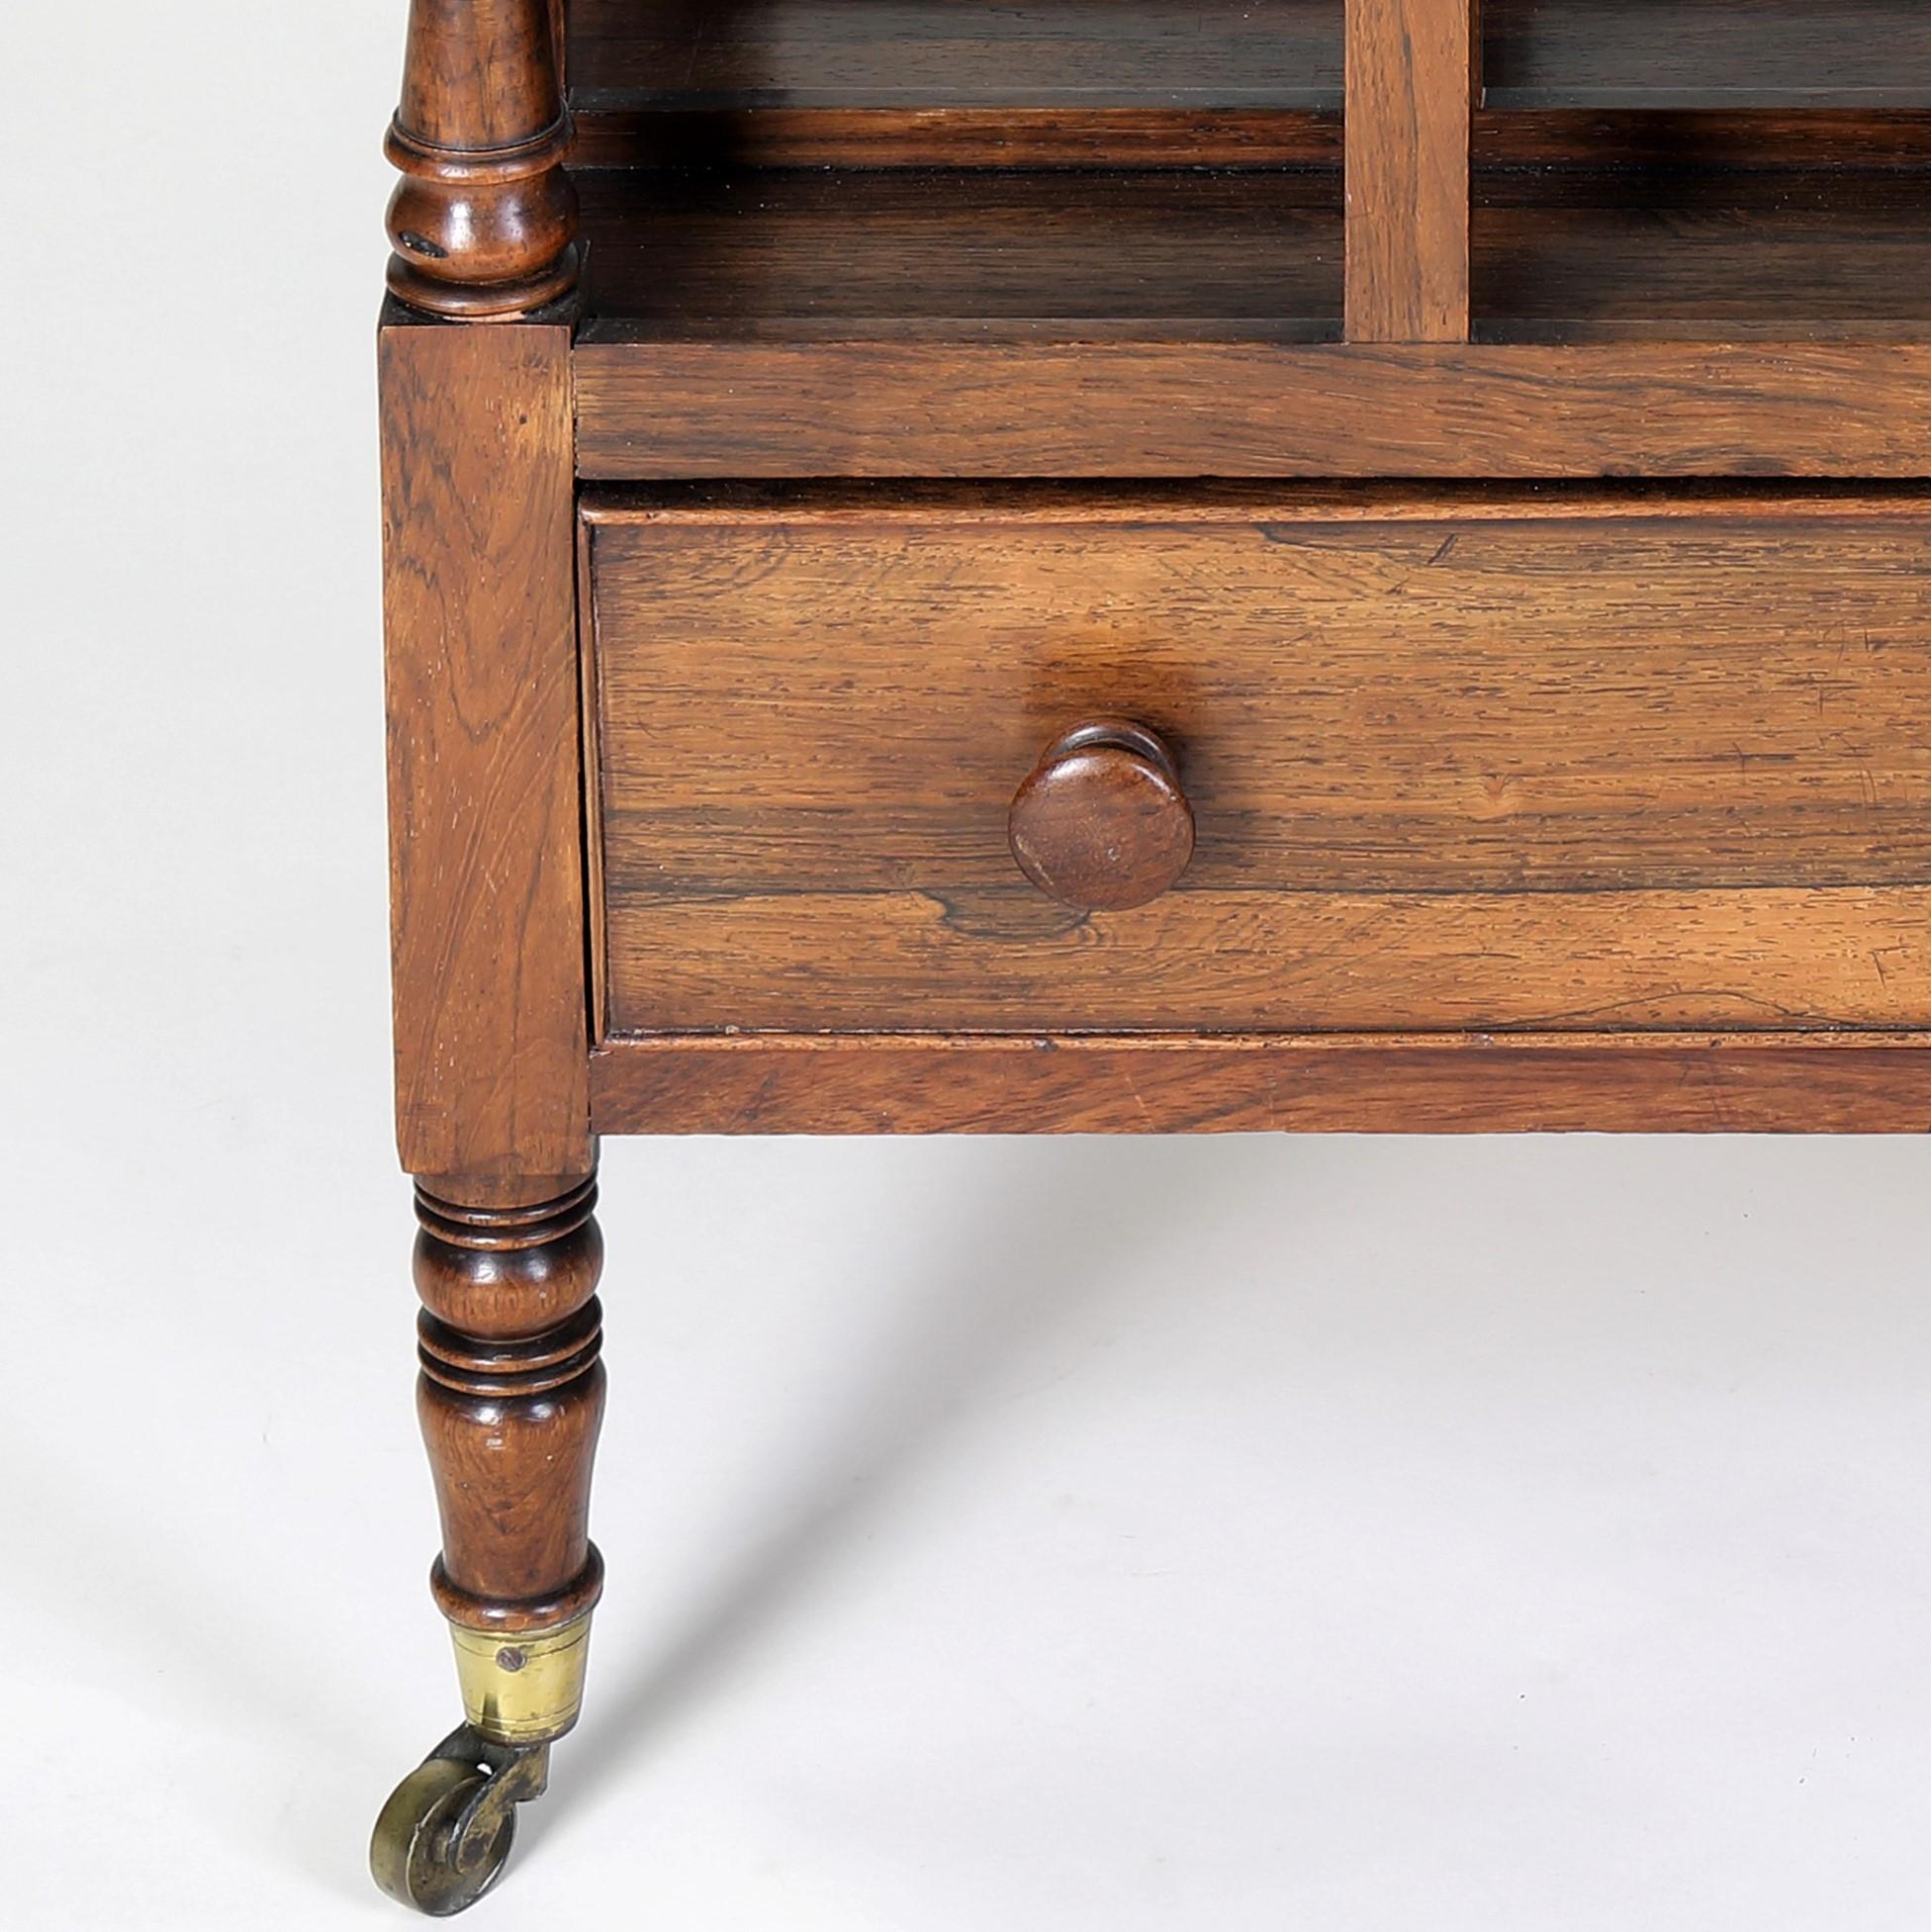 A very fine quality Regency period rosewood Canterbury of classic shape and form with four divisions and a central carrying handle above a drawer and raised on elegant turned legs.
A particularly smart version in superb condition for it's age.